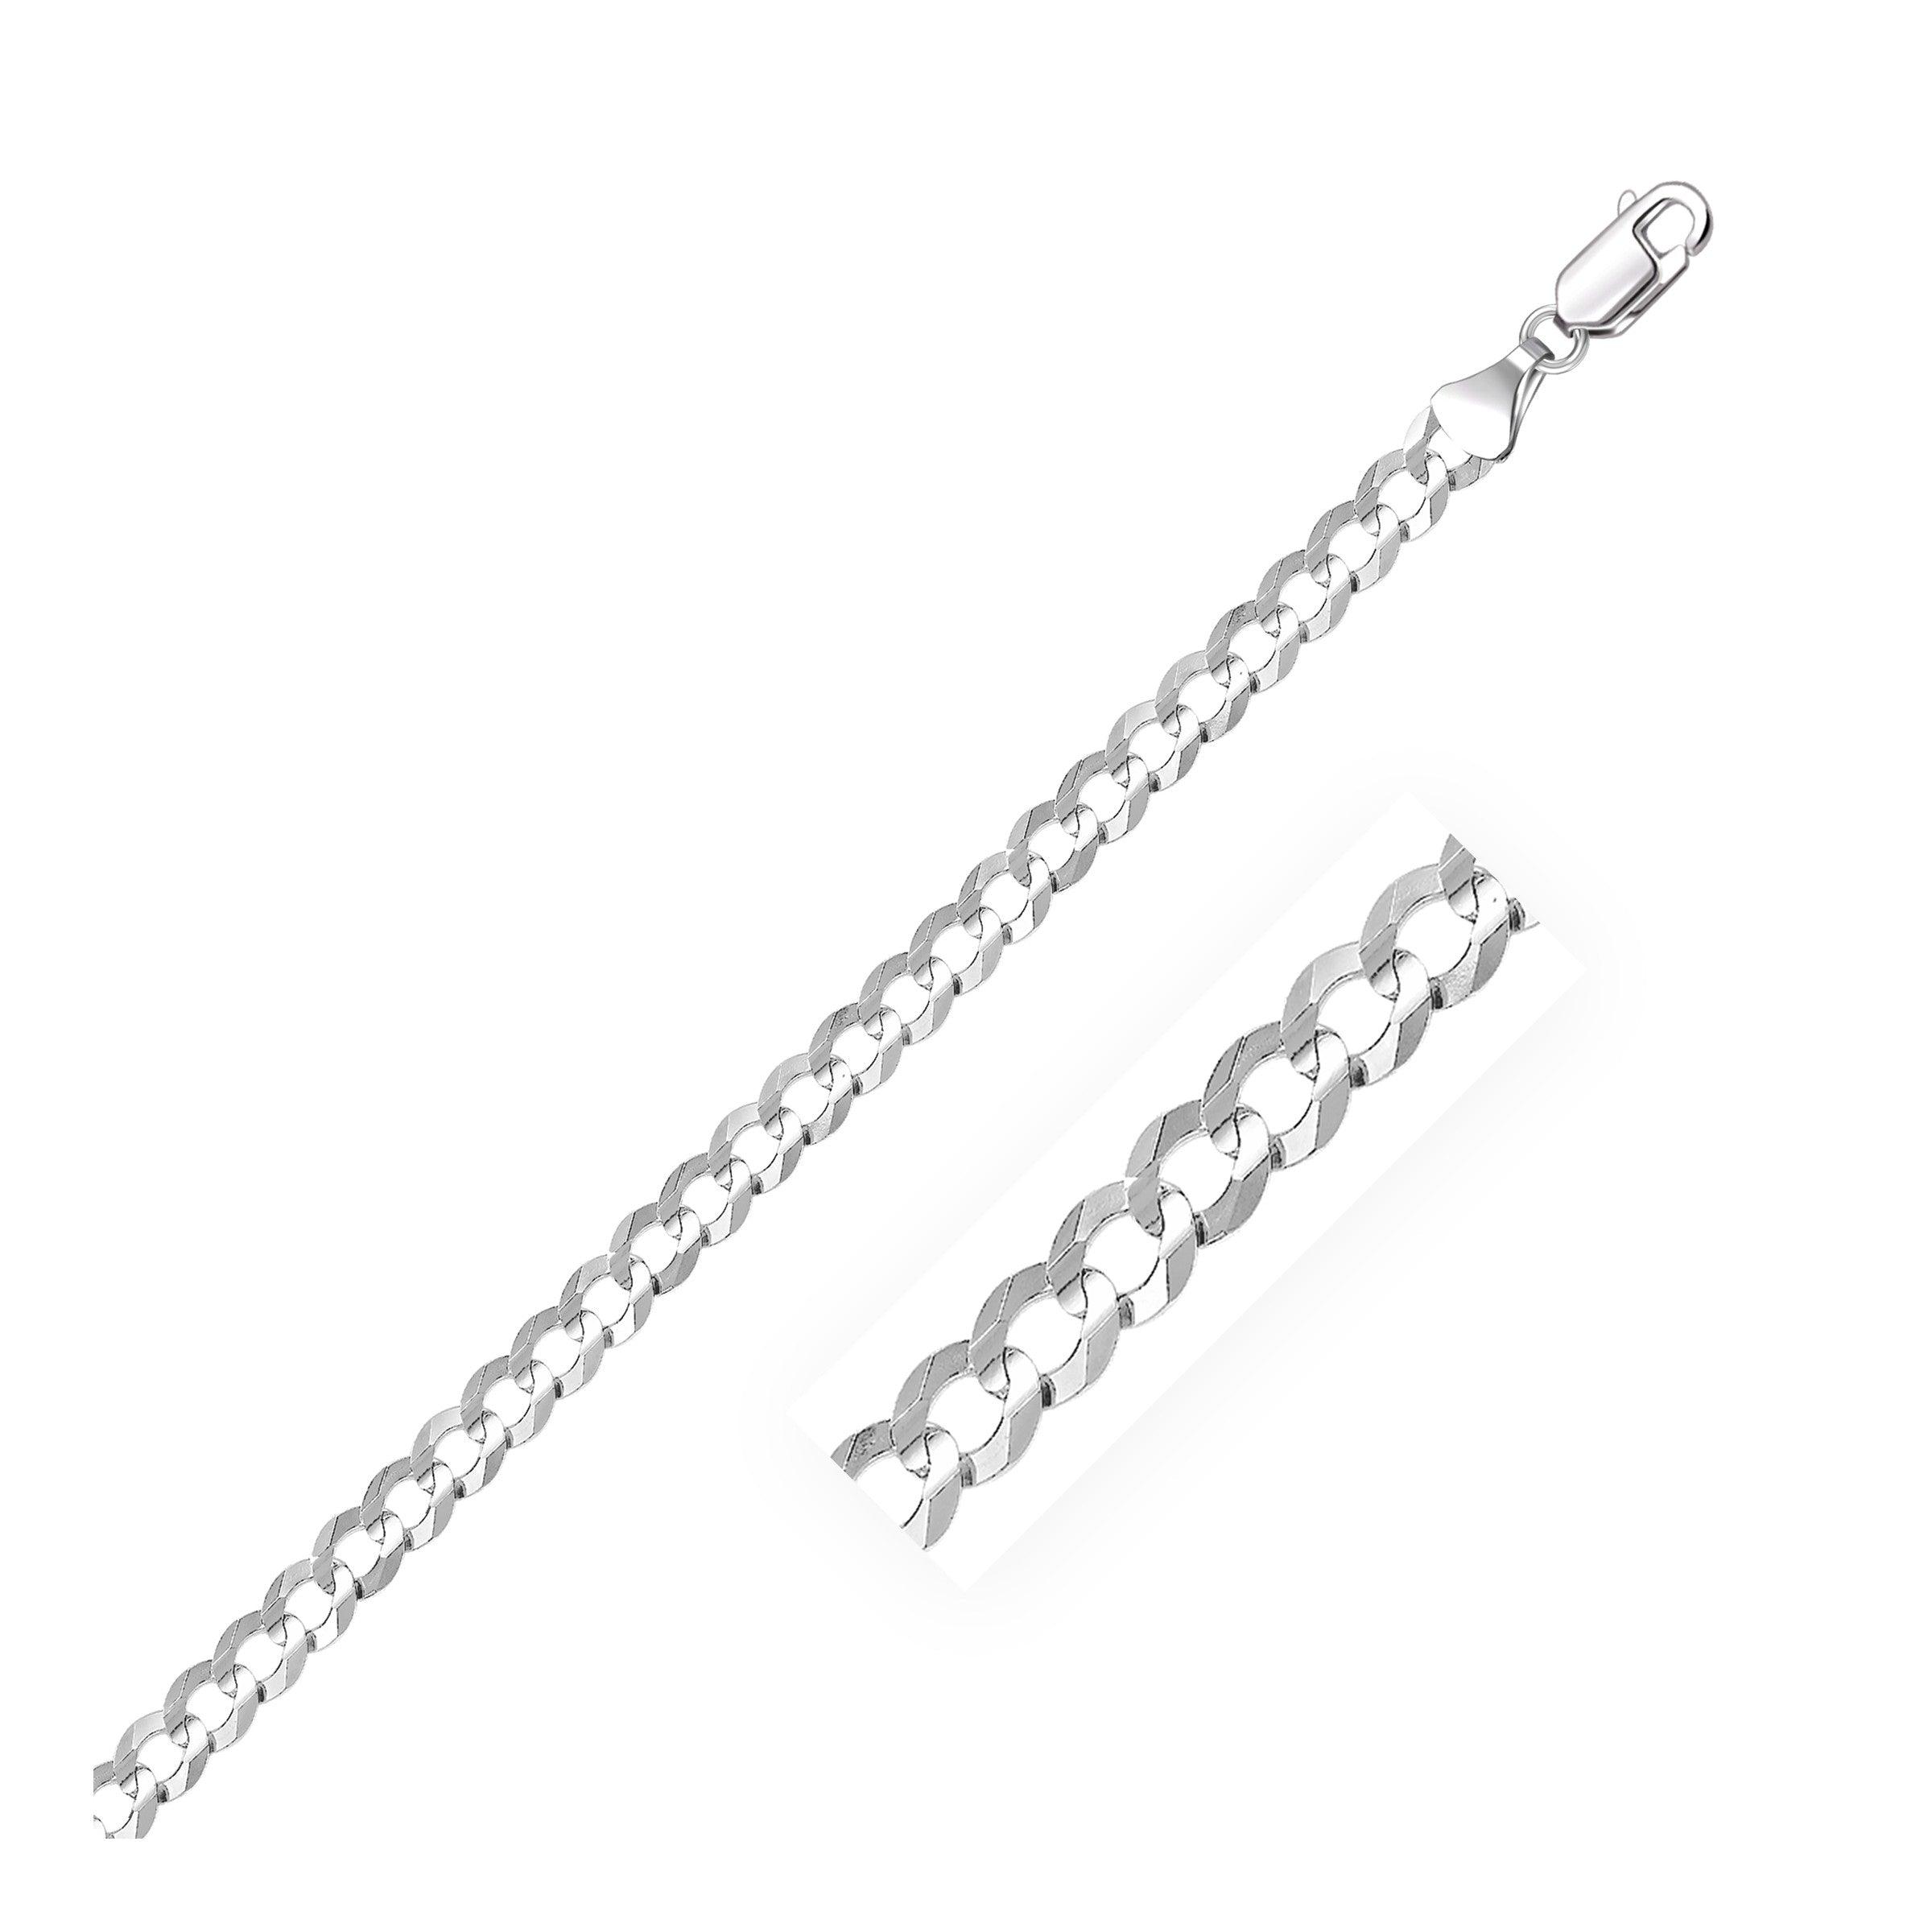 4.7mm 14k White Gold Solid Curb Chain freeshipping - Higher Class Elegance